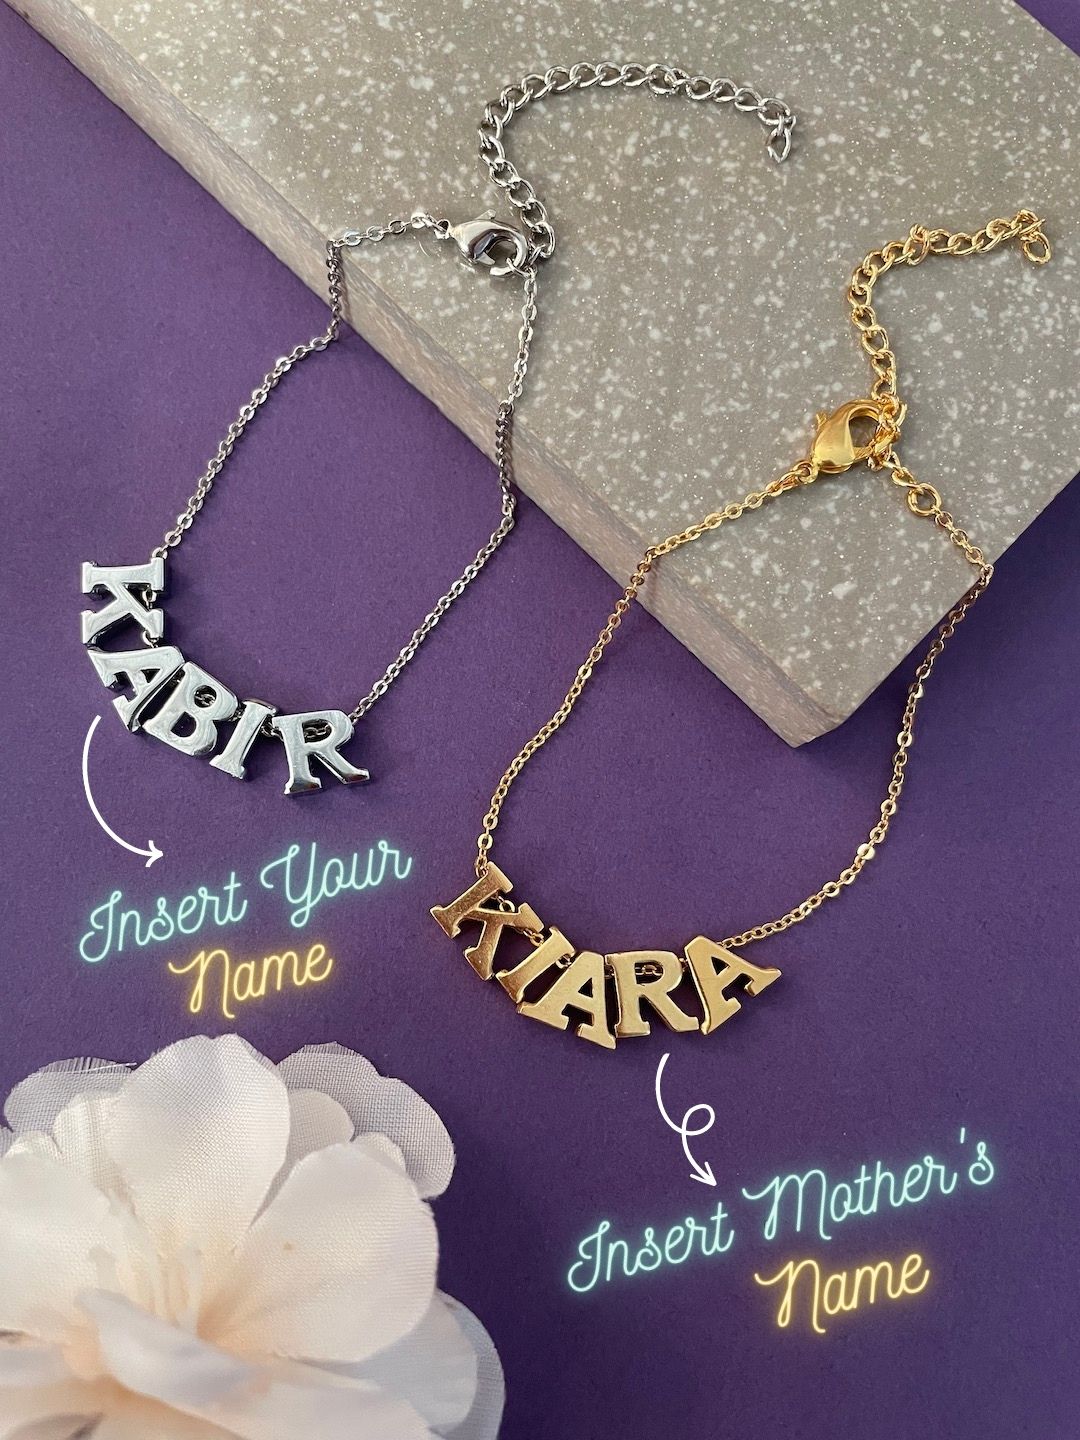 Matching Name Bracelets For Mother and Child (Son/Daughter)